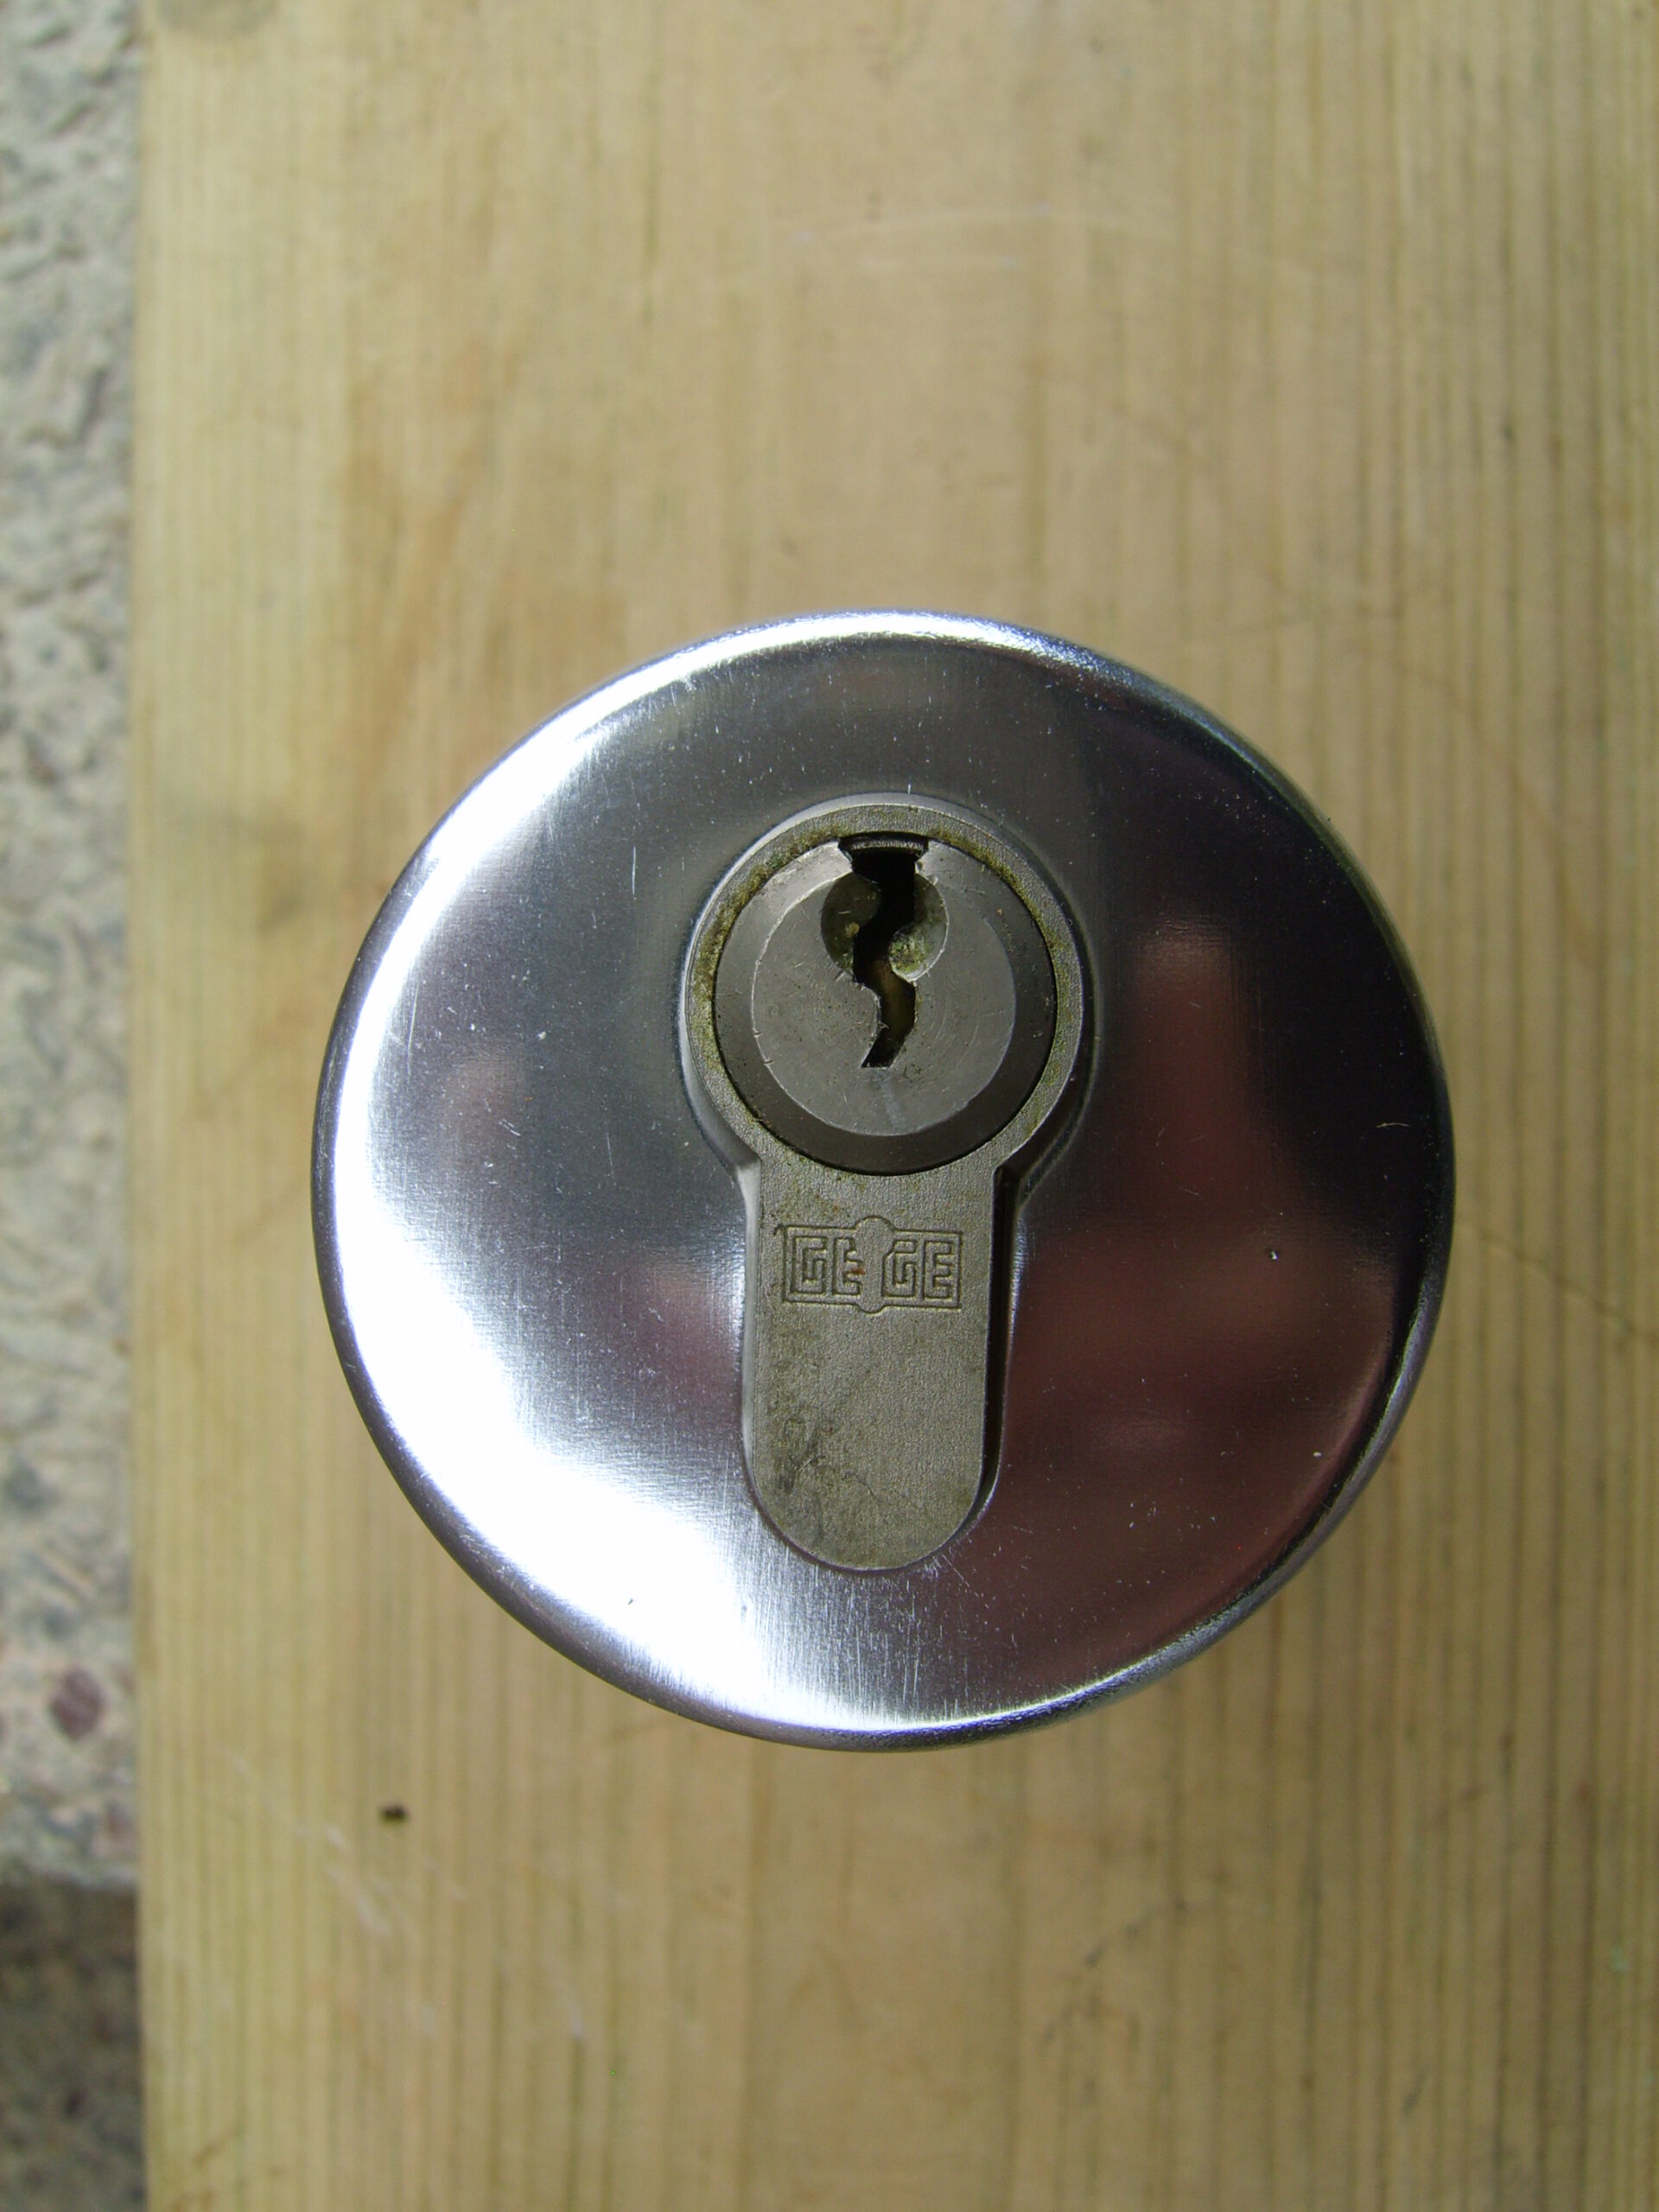 Non B.S. Euro cylinder deadlock fitted by local locksmith in wooden door